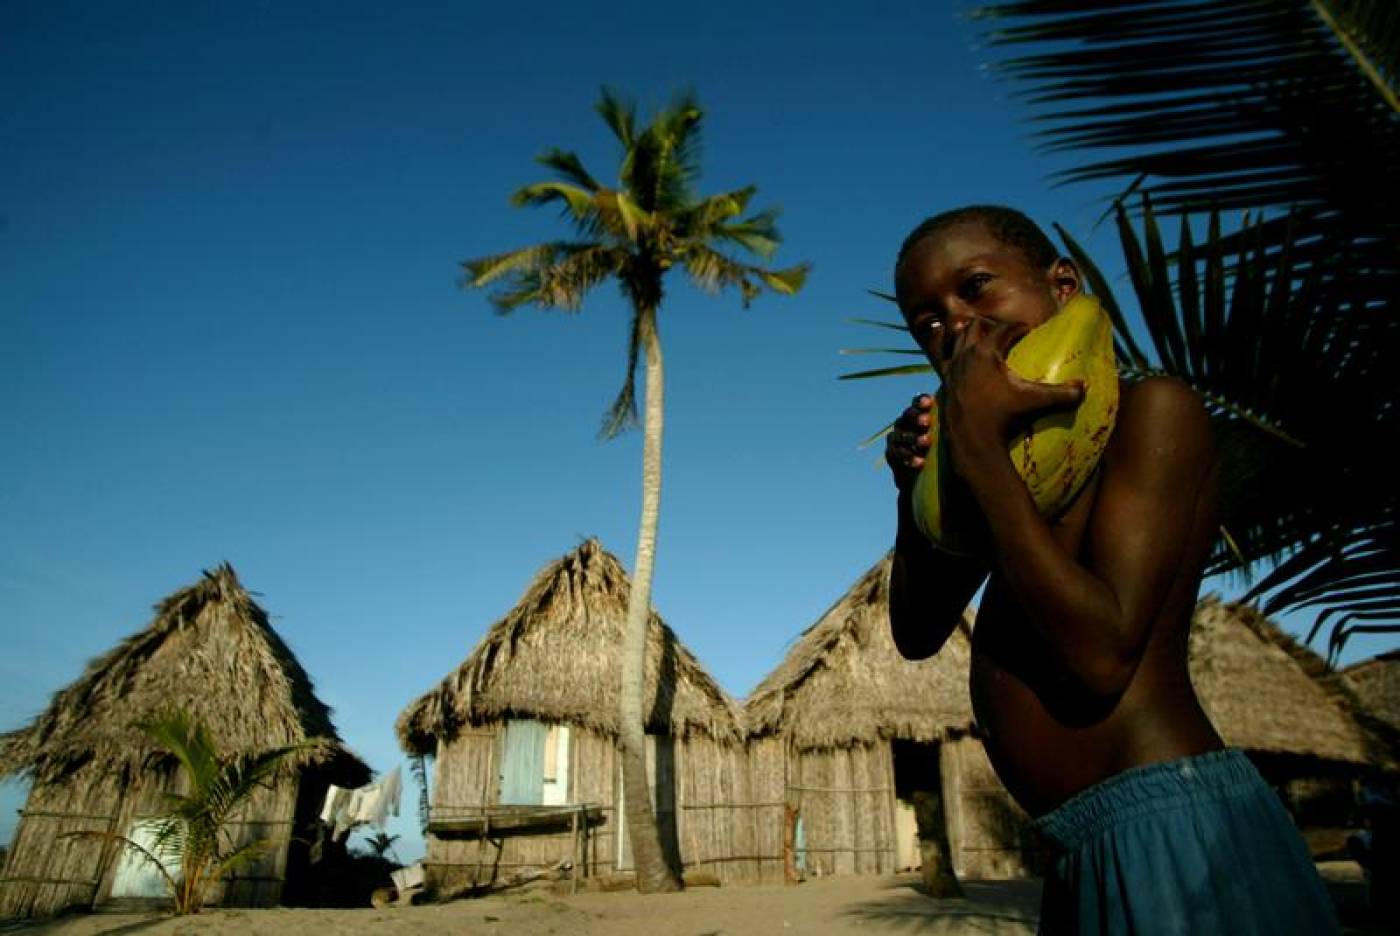 Caribbean Indigenous People Return To Roots As COVID-19 Shrinks Tourism